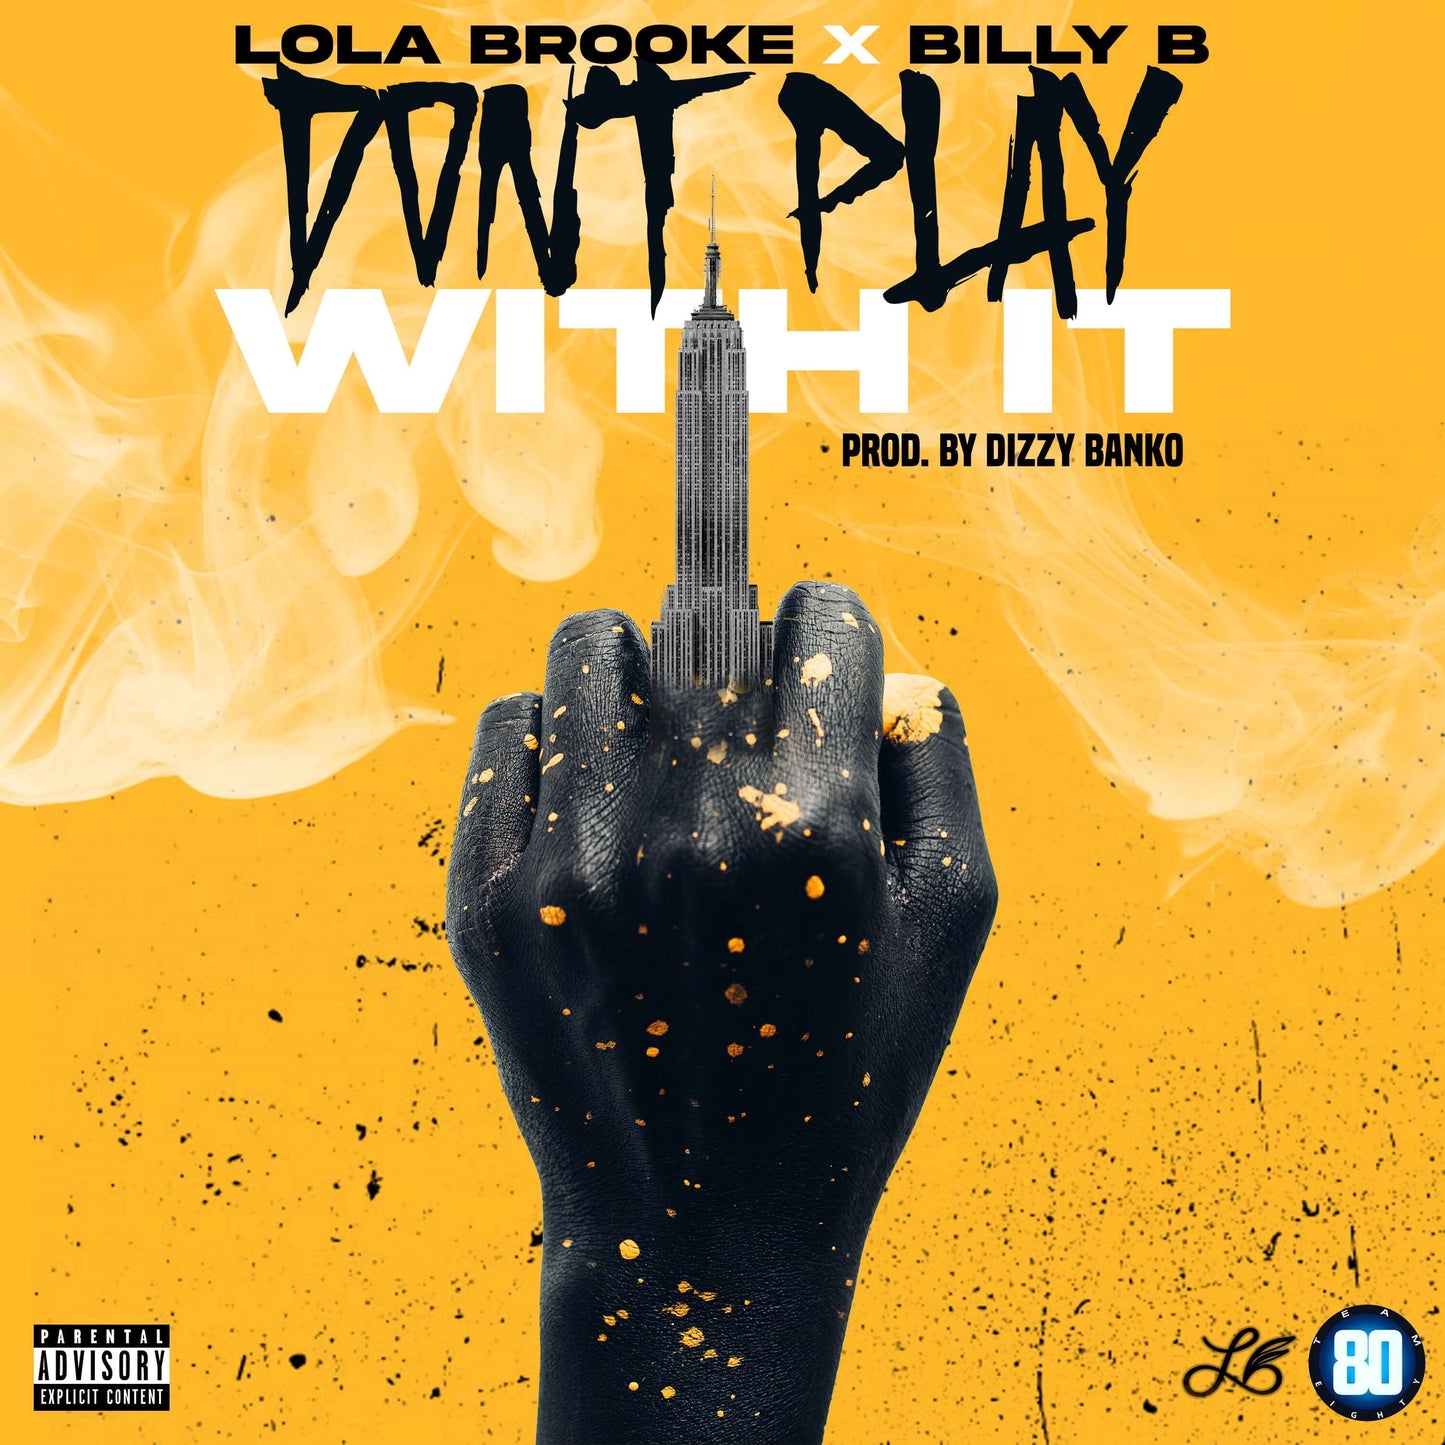 Lola Brooke - Don't Play With It con Billy B (Studio Acapella)